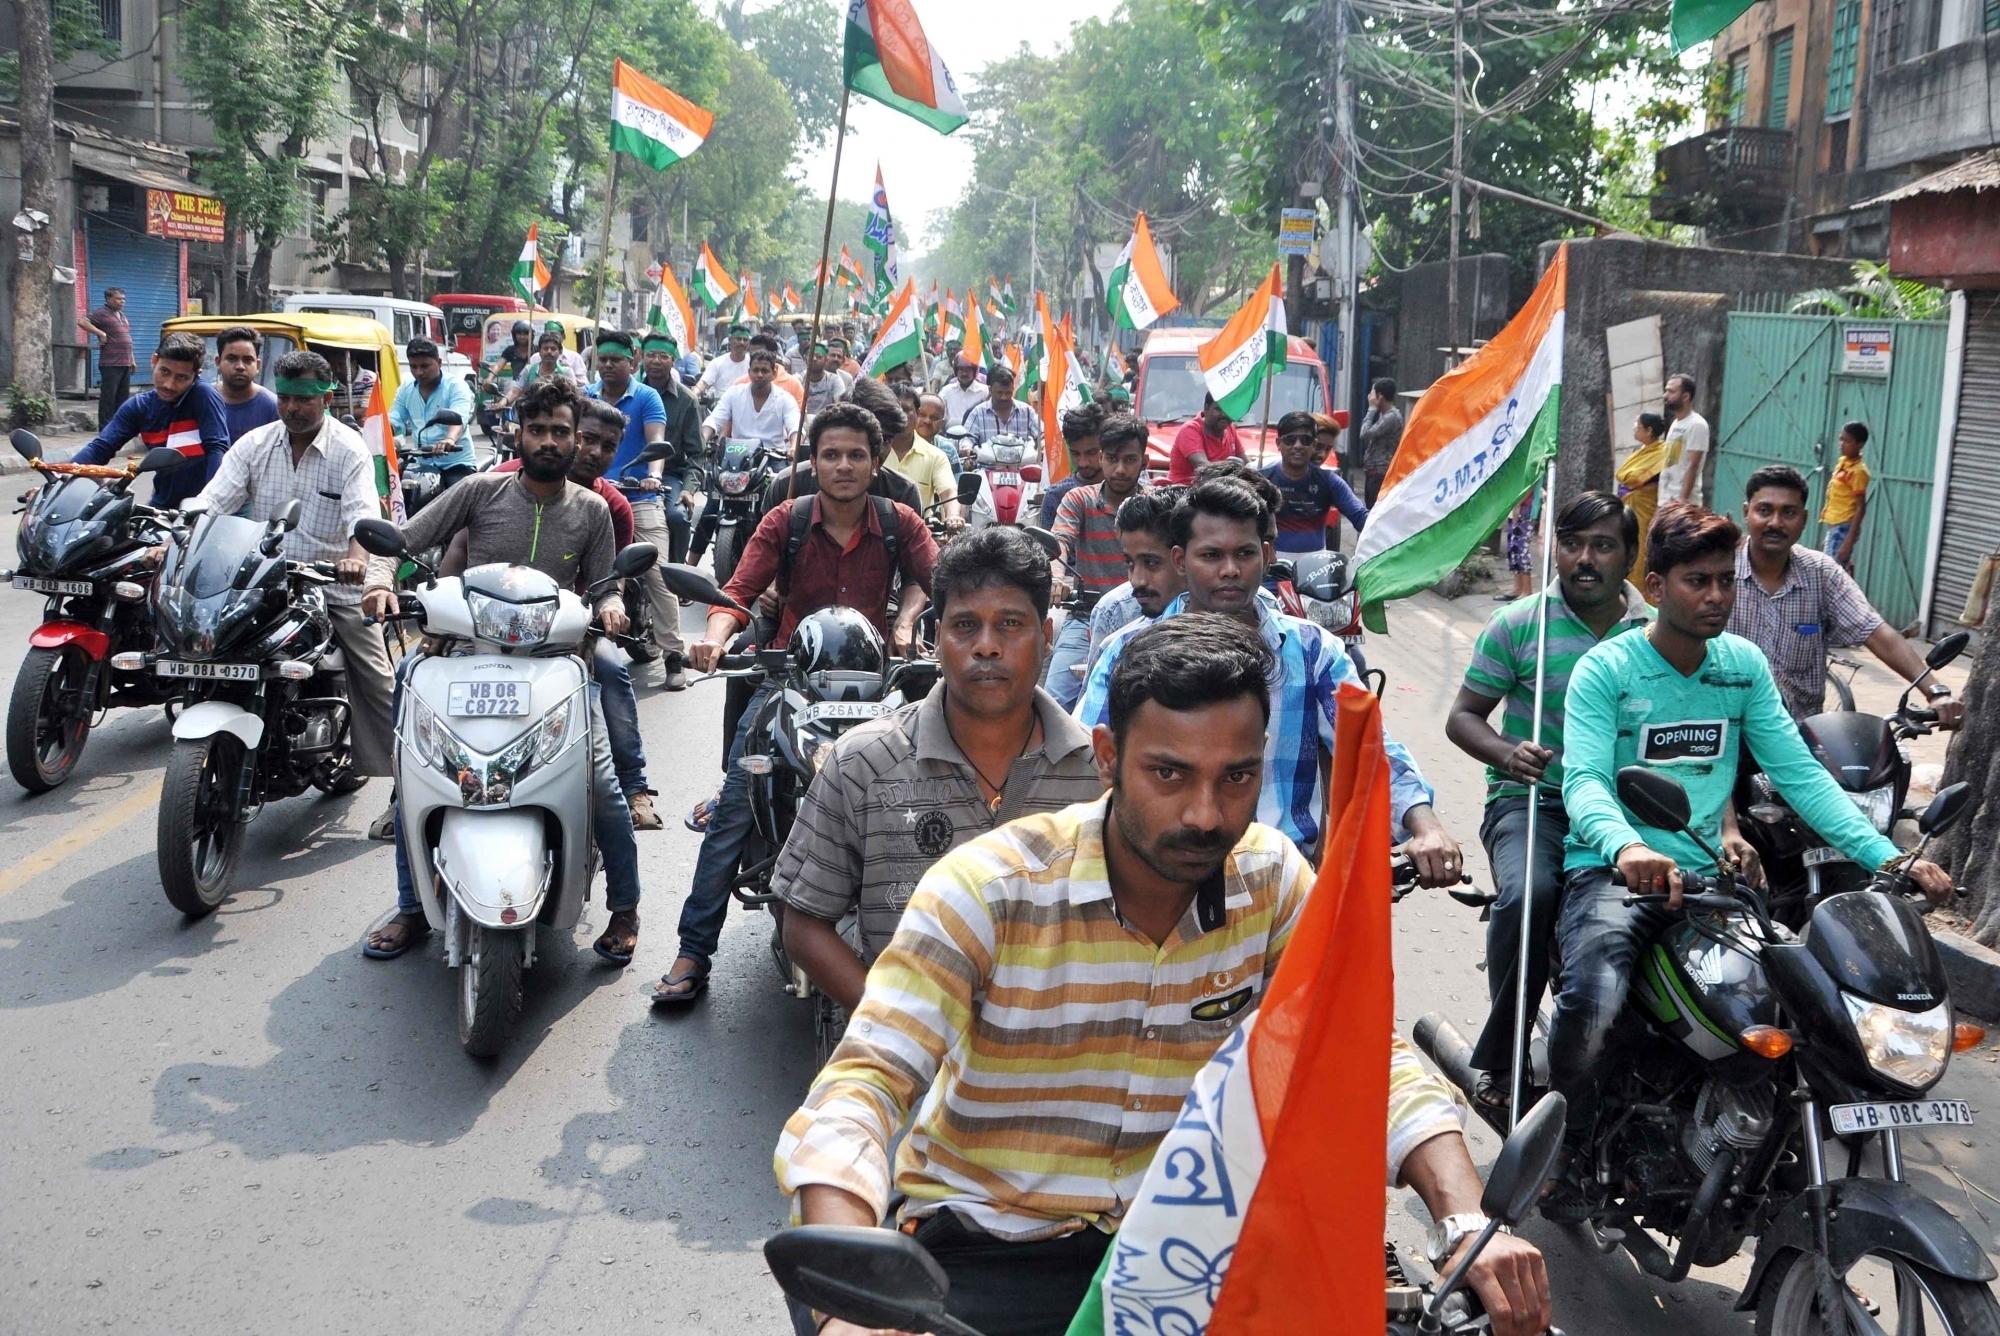 Ahead of Assembly Elections, EC Bans Bike Rallies 72 hours